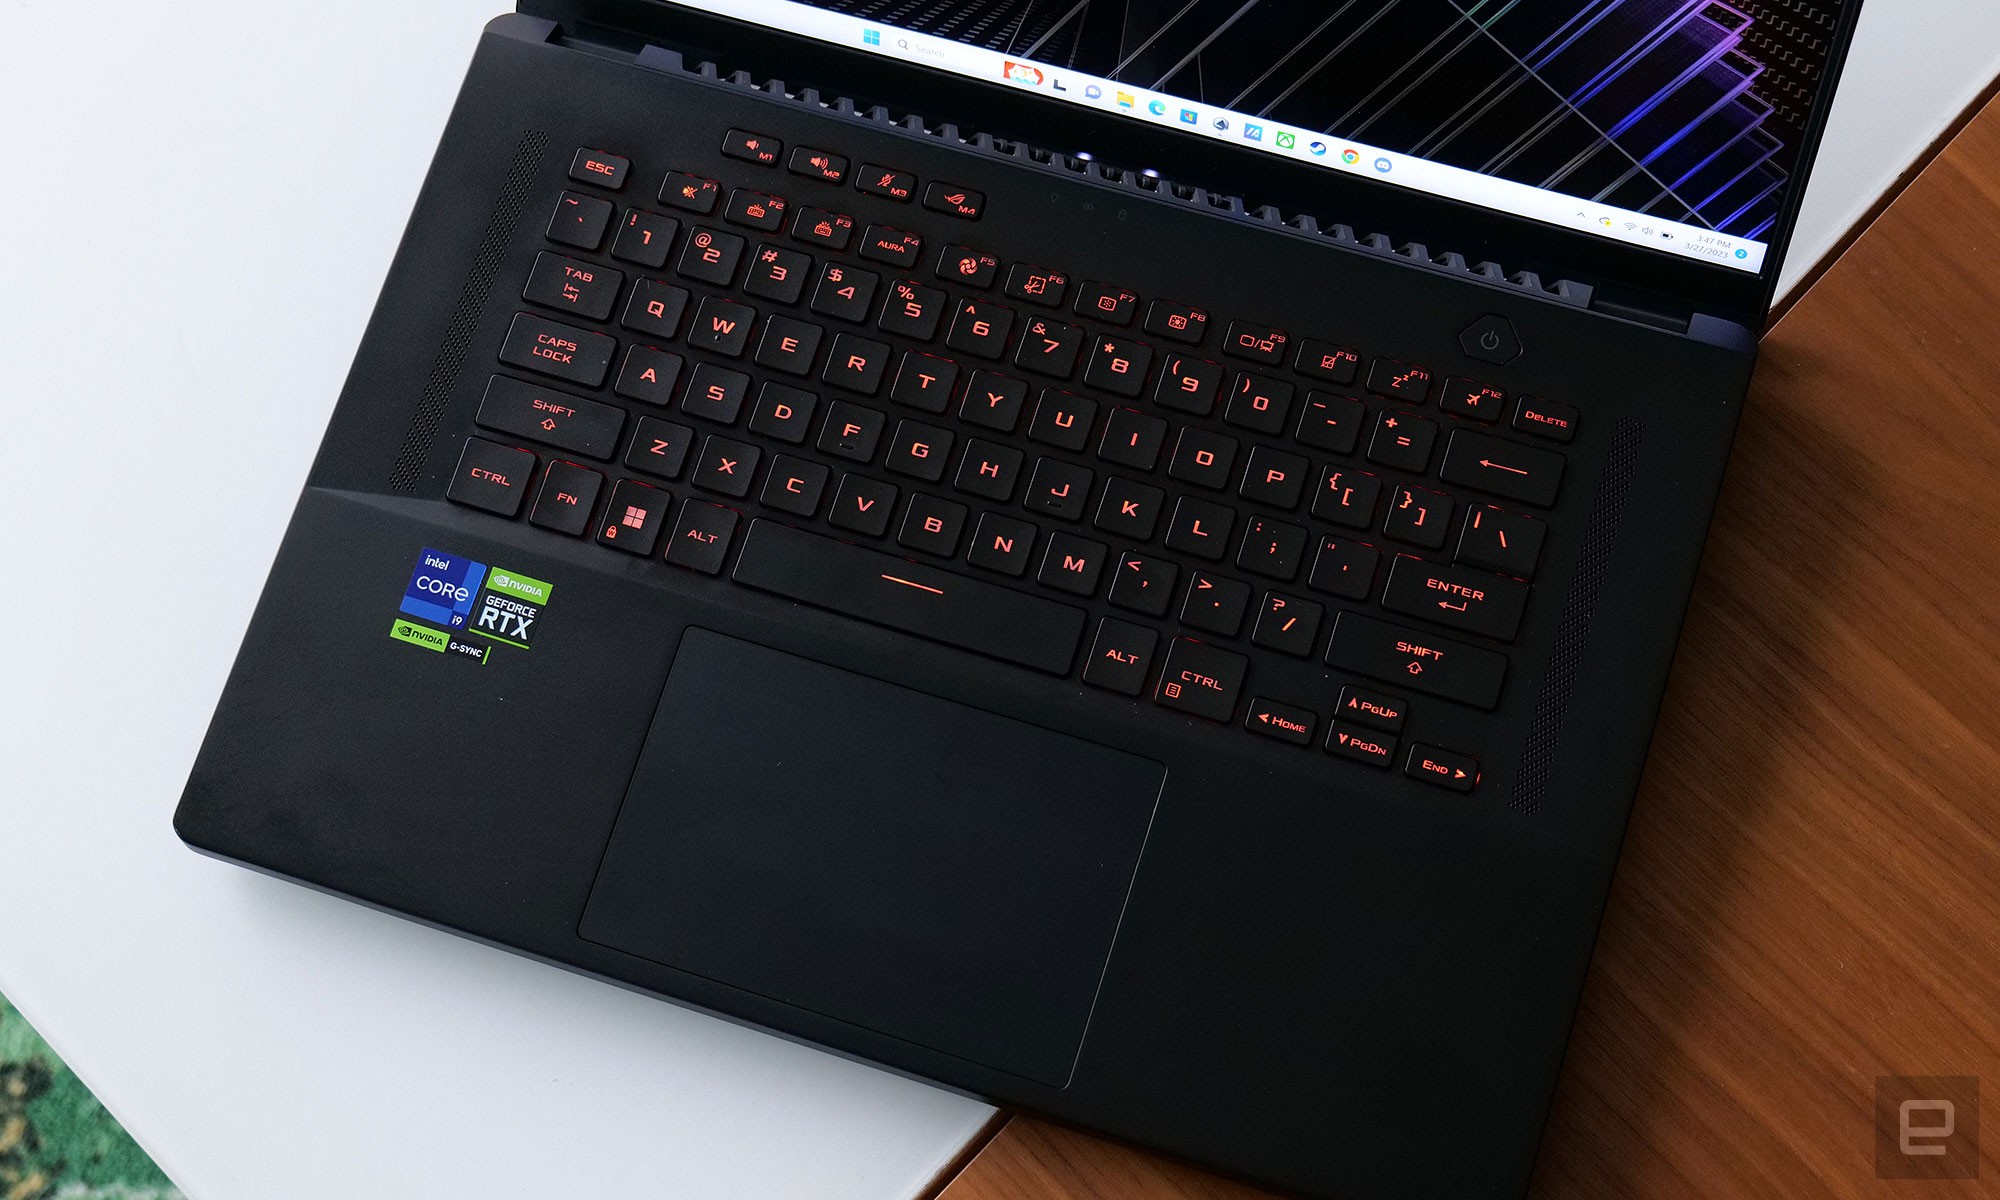 As you'd expect on a premium gaming PC, the ASUS ROG Zephyrus M16 comes with a keyboard that supports customizable RGB lighting. 